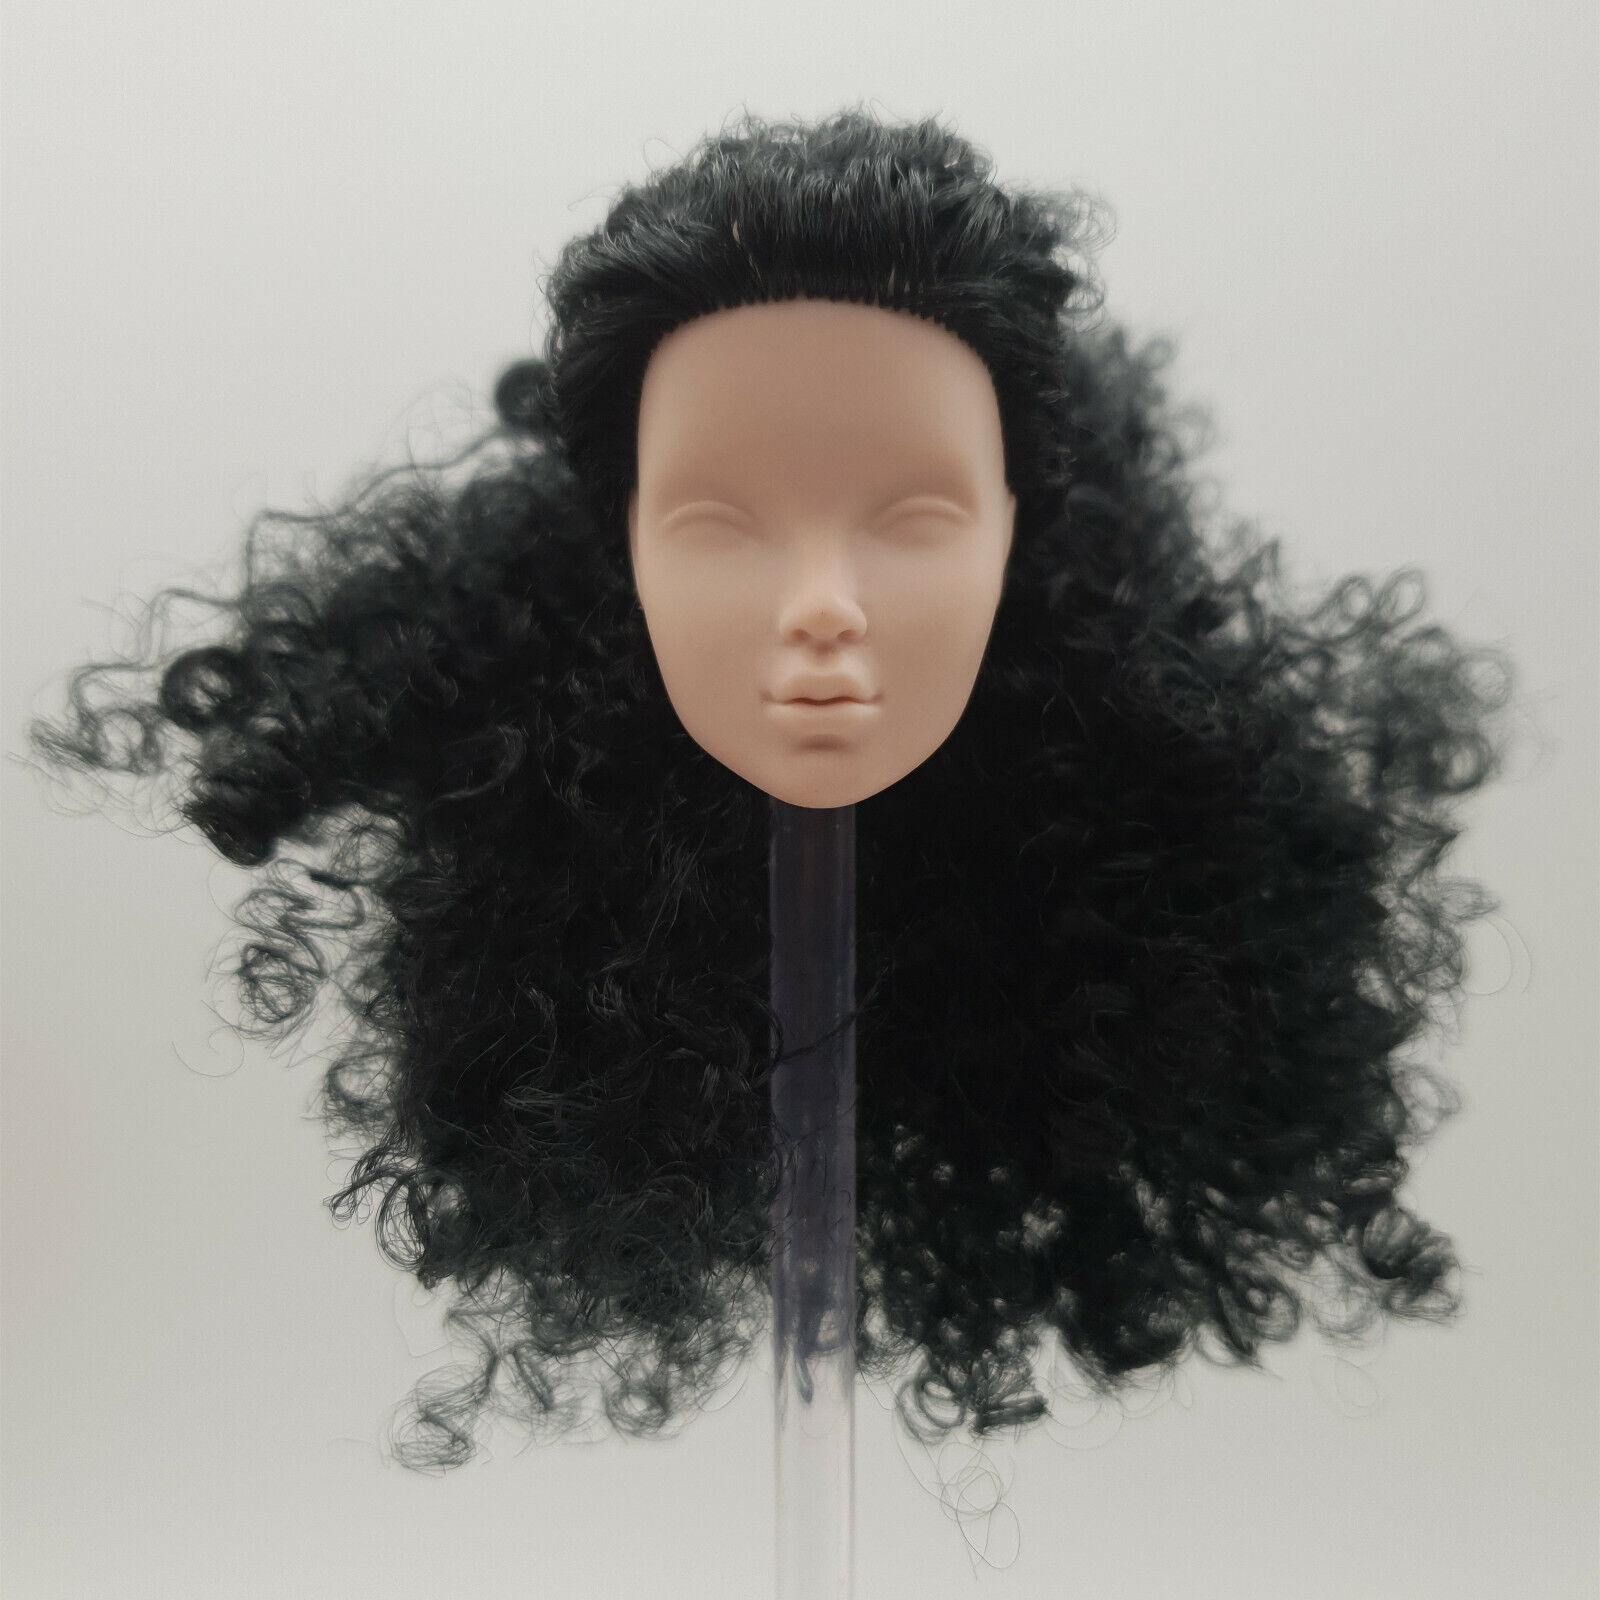 Fashion Royalty 1:6 Scale Curly Hair Dynamite Girl Integrity Unpainted Doll Head